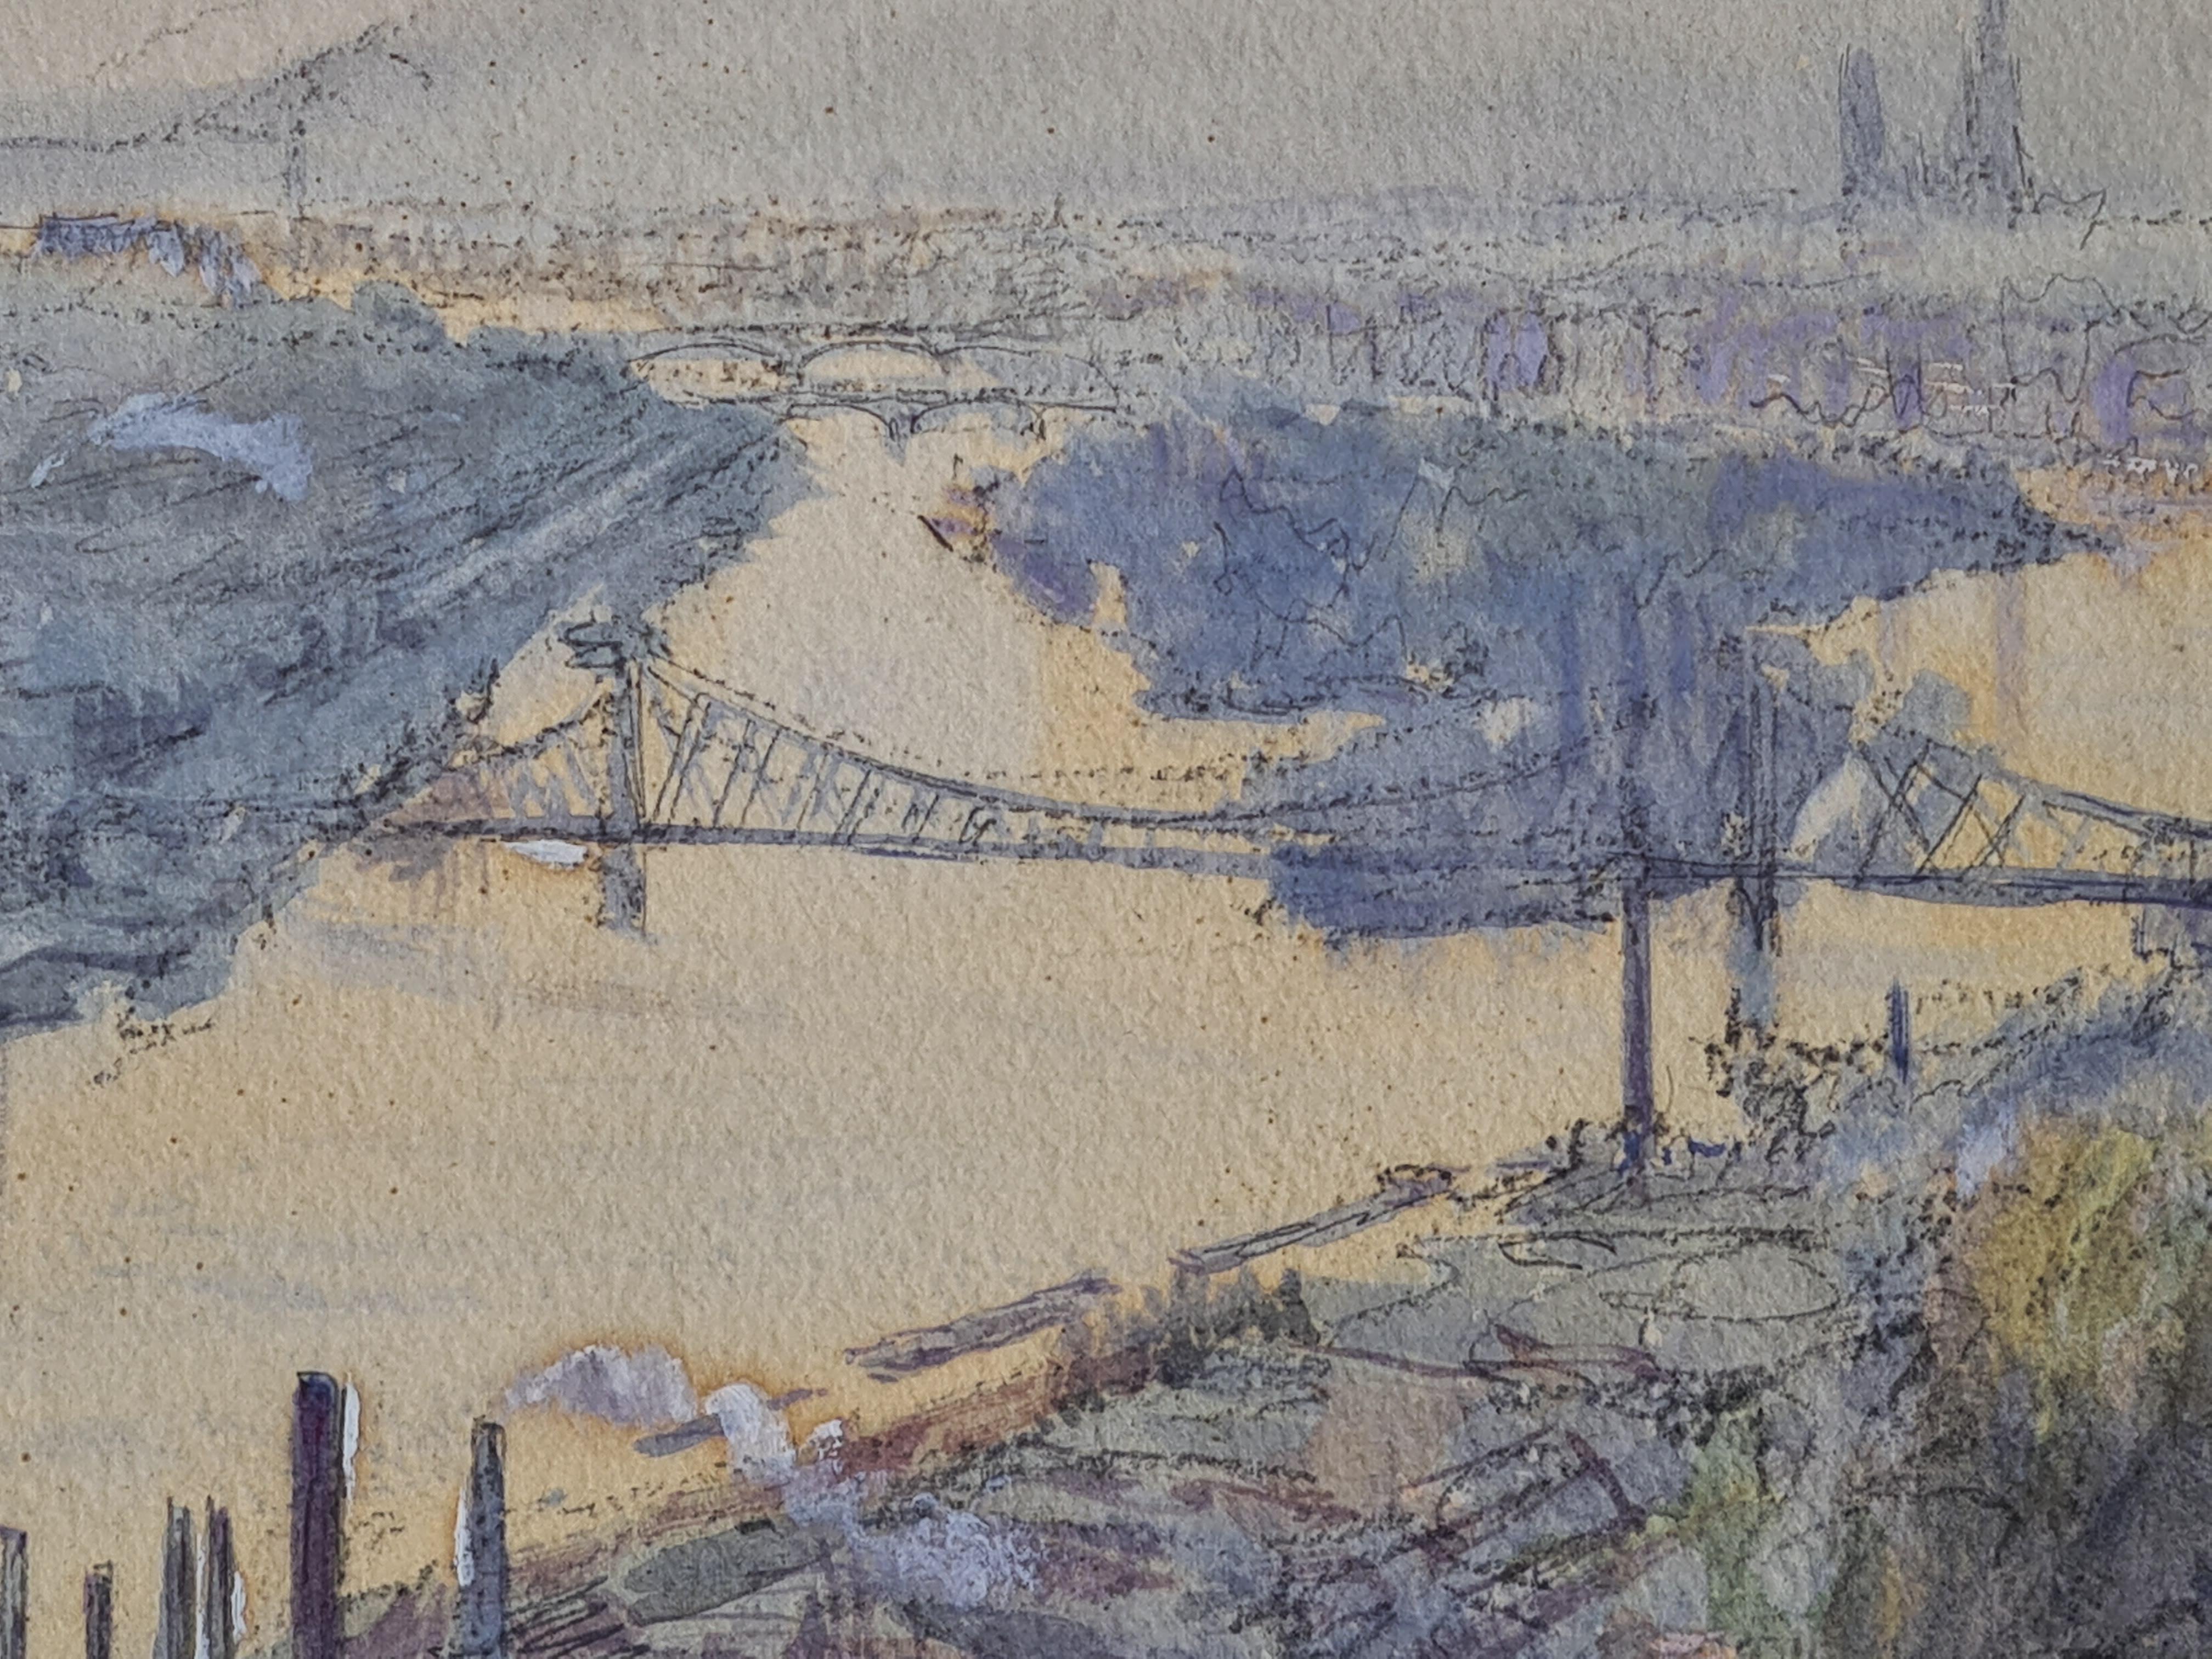 An early 20th Century drawing and watercolour view of the city and riverscape at Rouen by French artist Georges Planes. The work is signed and dated bottom right in red ink. There is also a watermark and oval stamp for 'Arches' paper. The painting